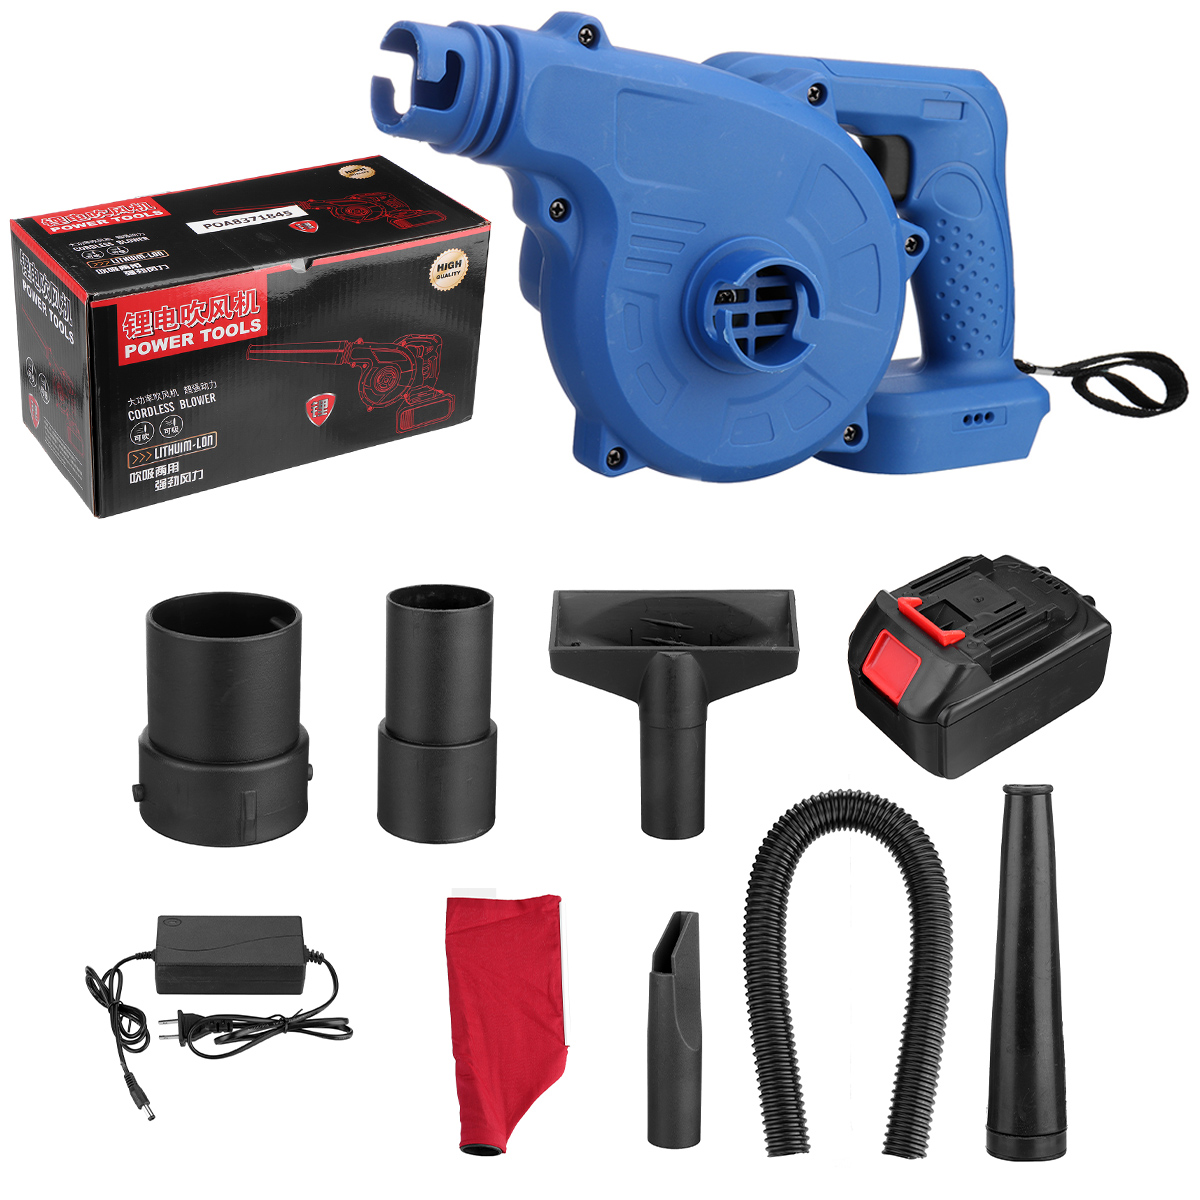 2-IN-1-Electric-Air-Blower-Kit-Cleaner-Wireless-Air-Fan-Dust-Blowing-Computer-Dust-Collector-Adapted-1838499-10